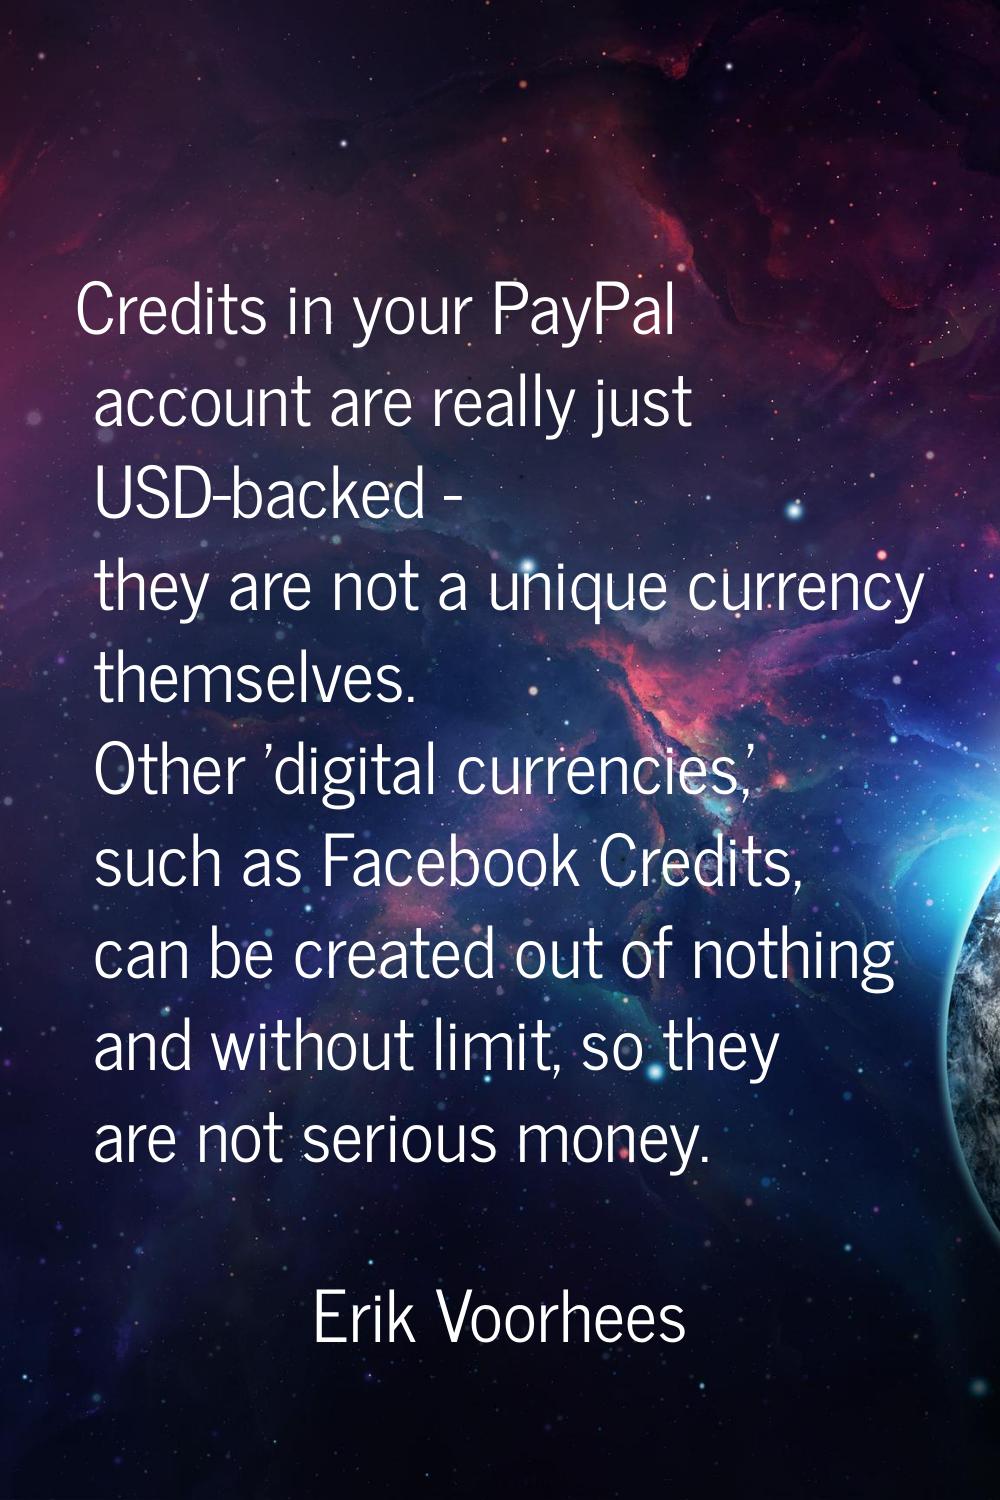 Credits in your PayPal account are really just USD-backed - they are not a unique currency themselv